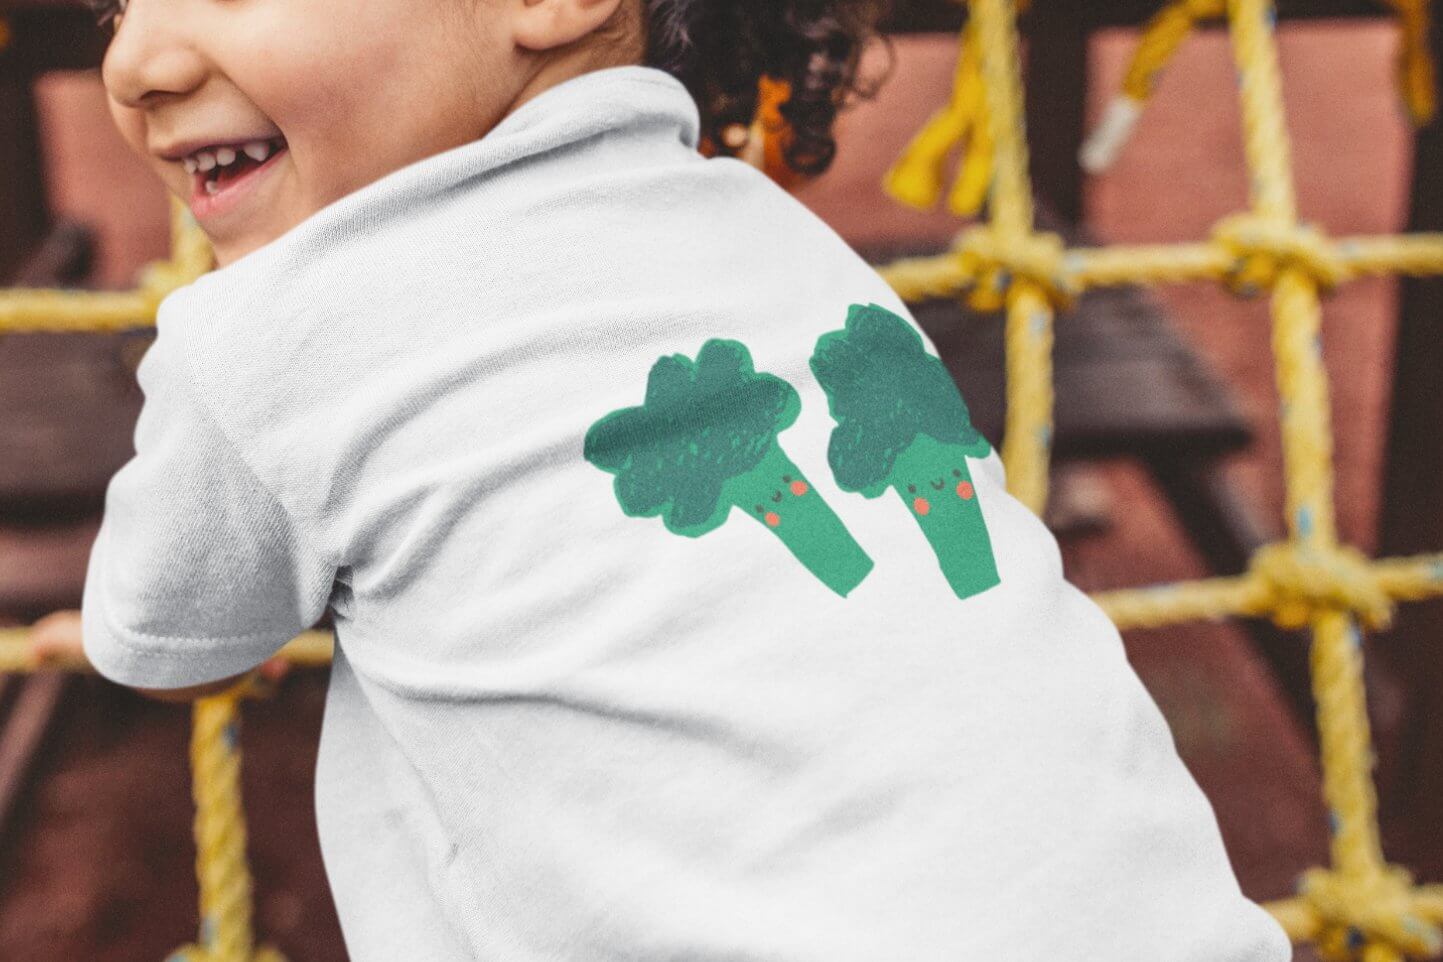 Two green broccoli are drawn on the boy's white T-shirt.